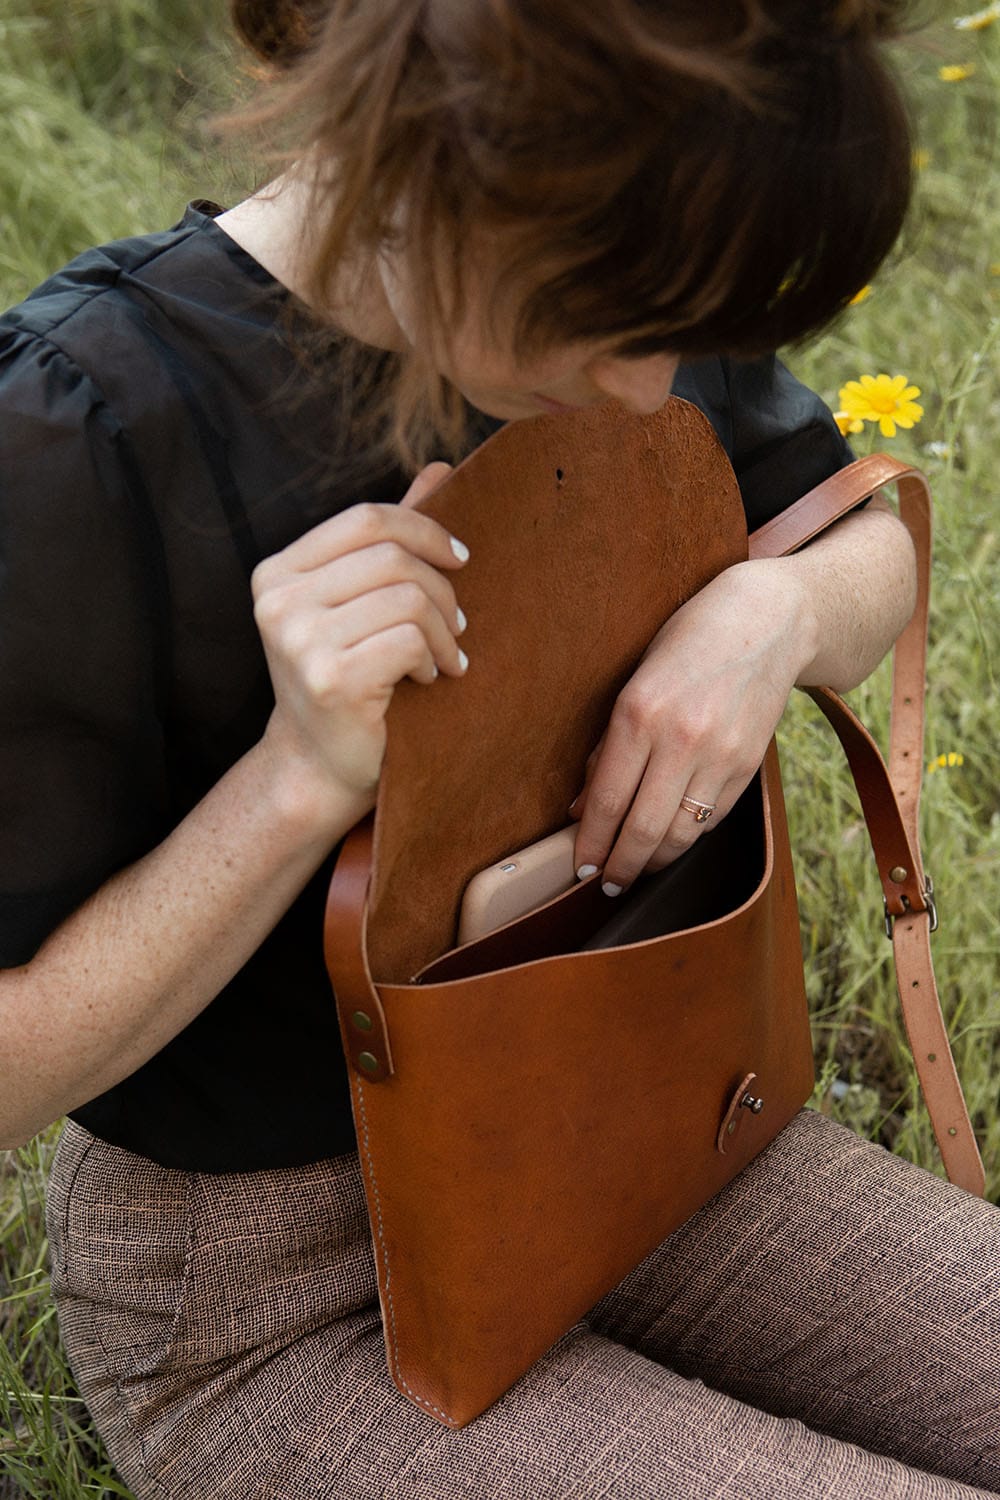 Miller Canvas & Leather Crossbody Bag In Natural